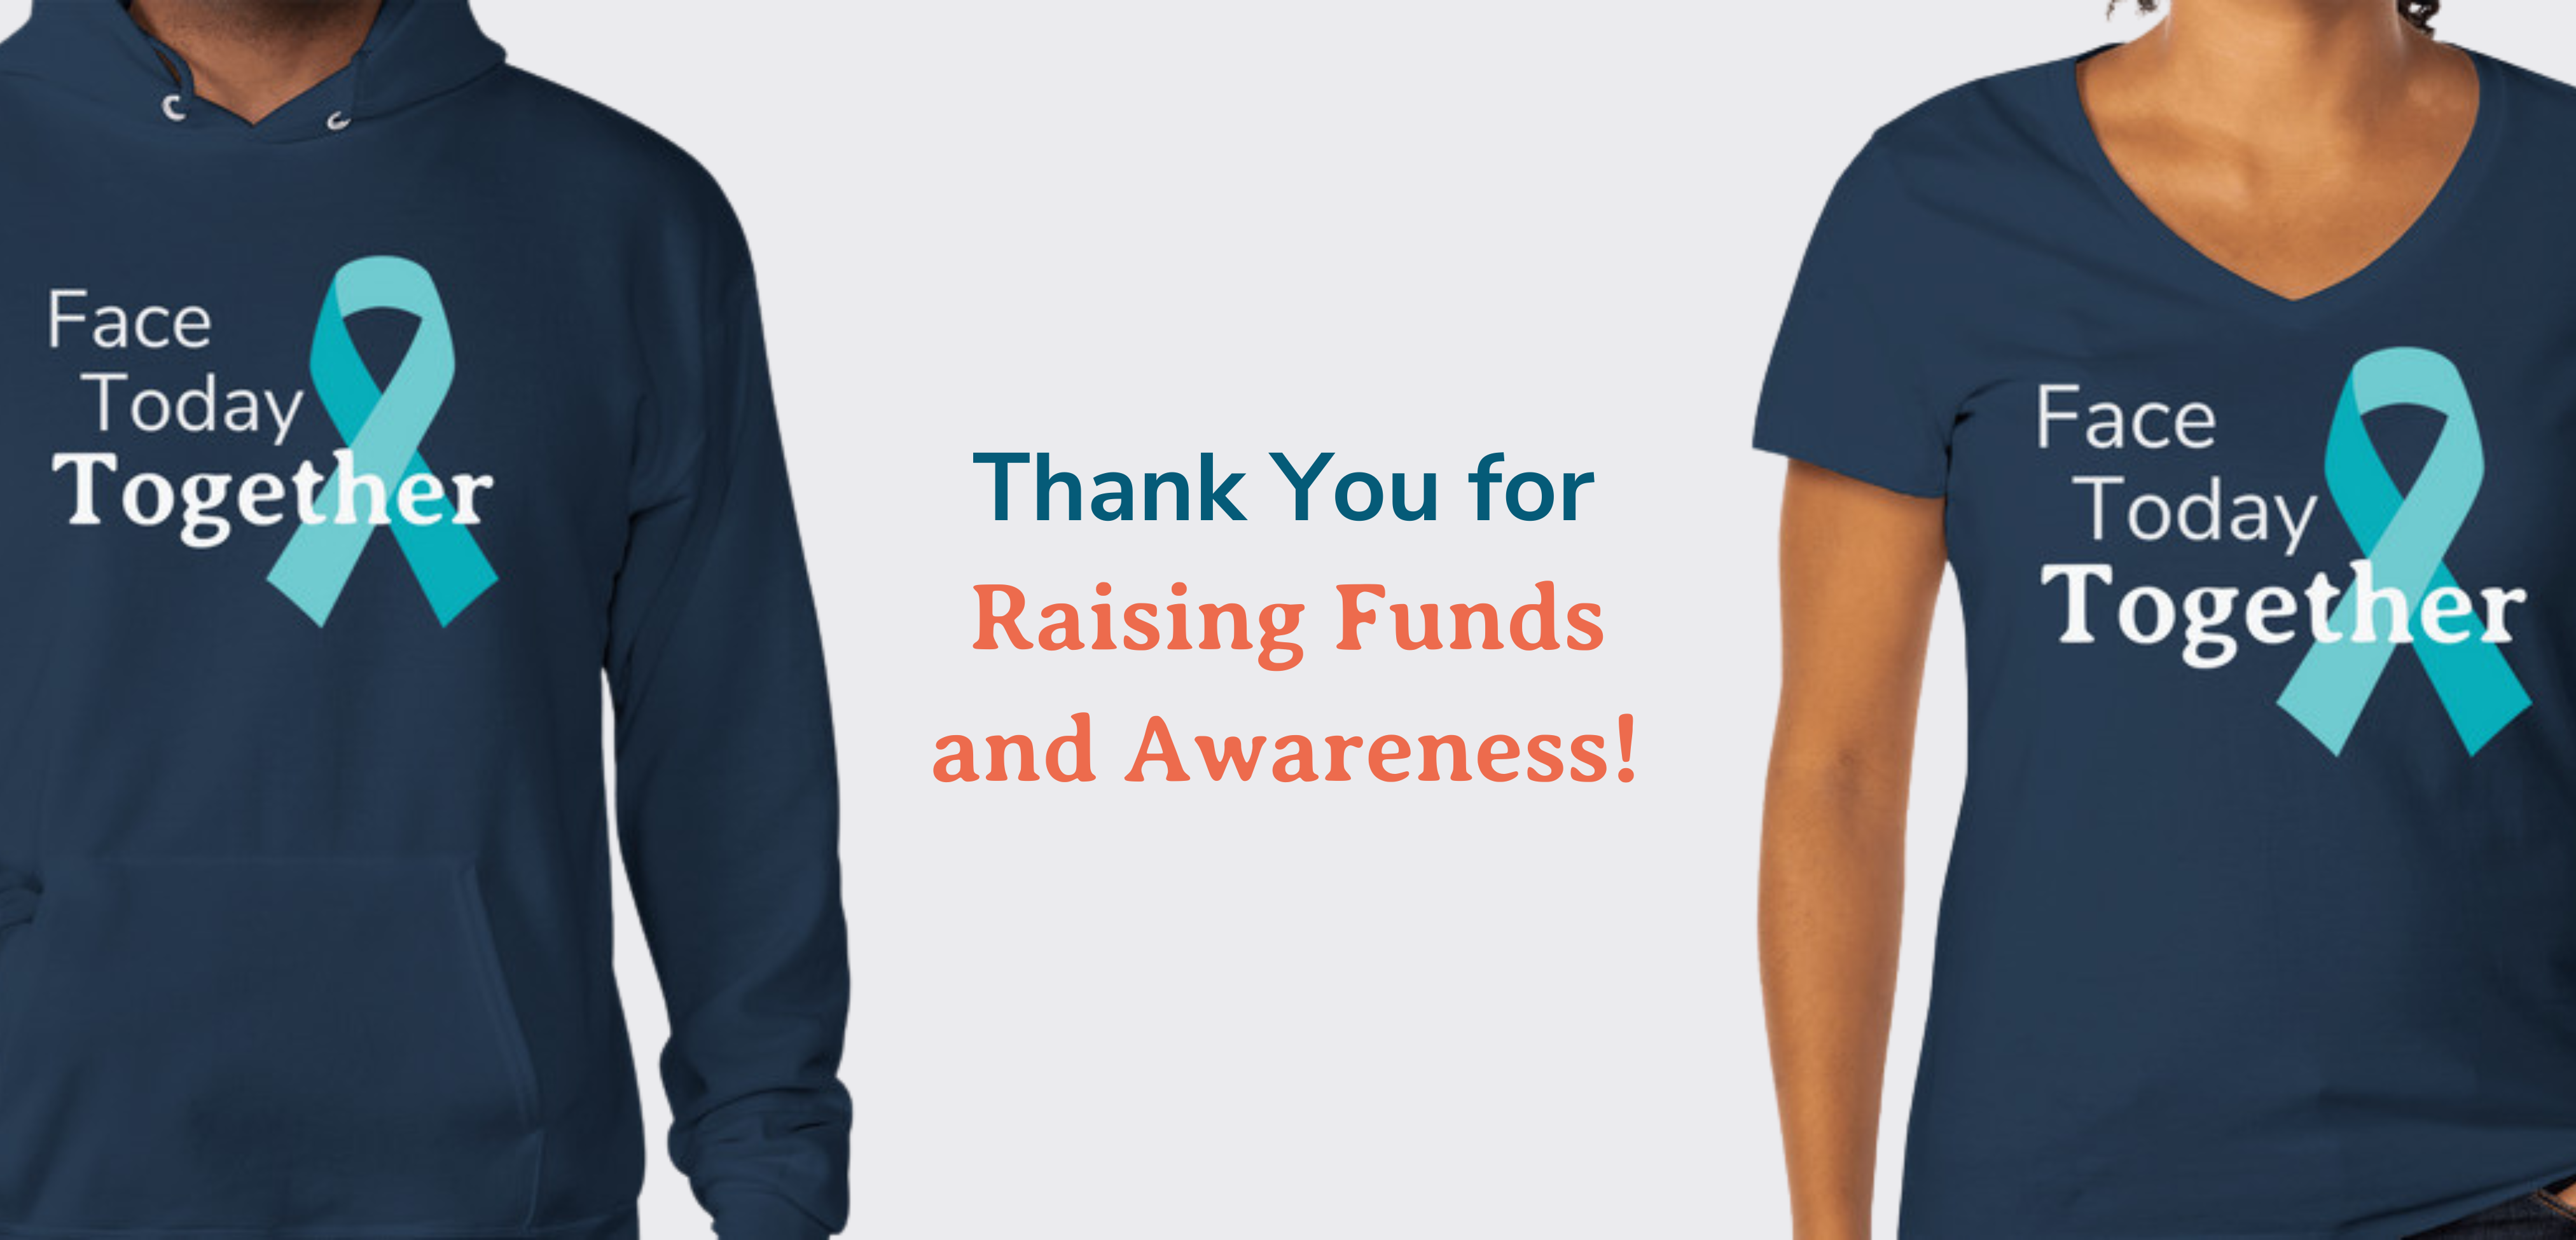 Thank You for Raising Funds and Awareness!